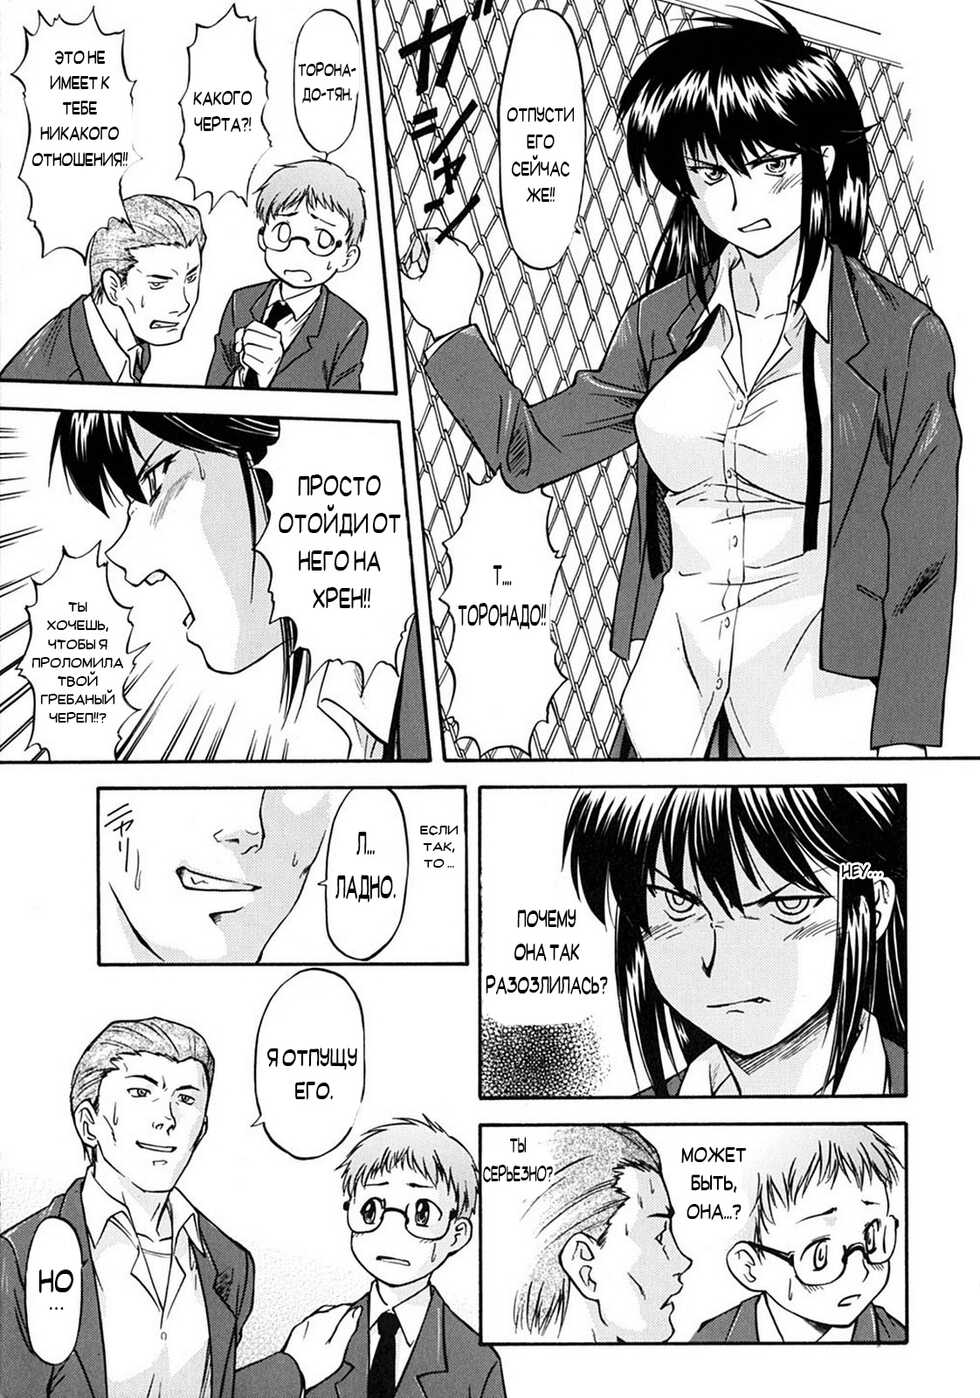 [Nagare Ippon] Week Point [Russian] - Page 18